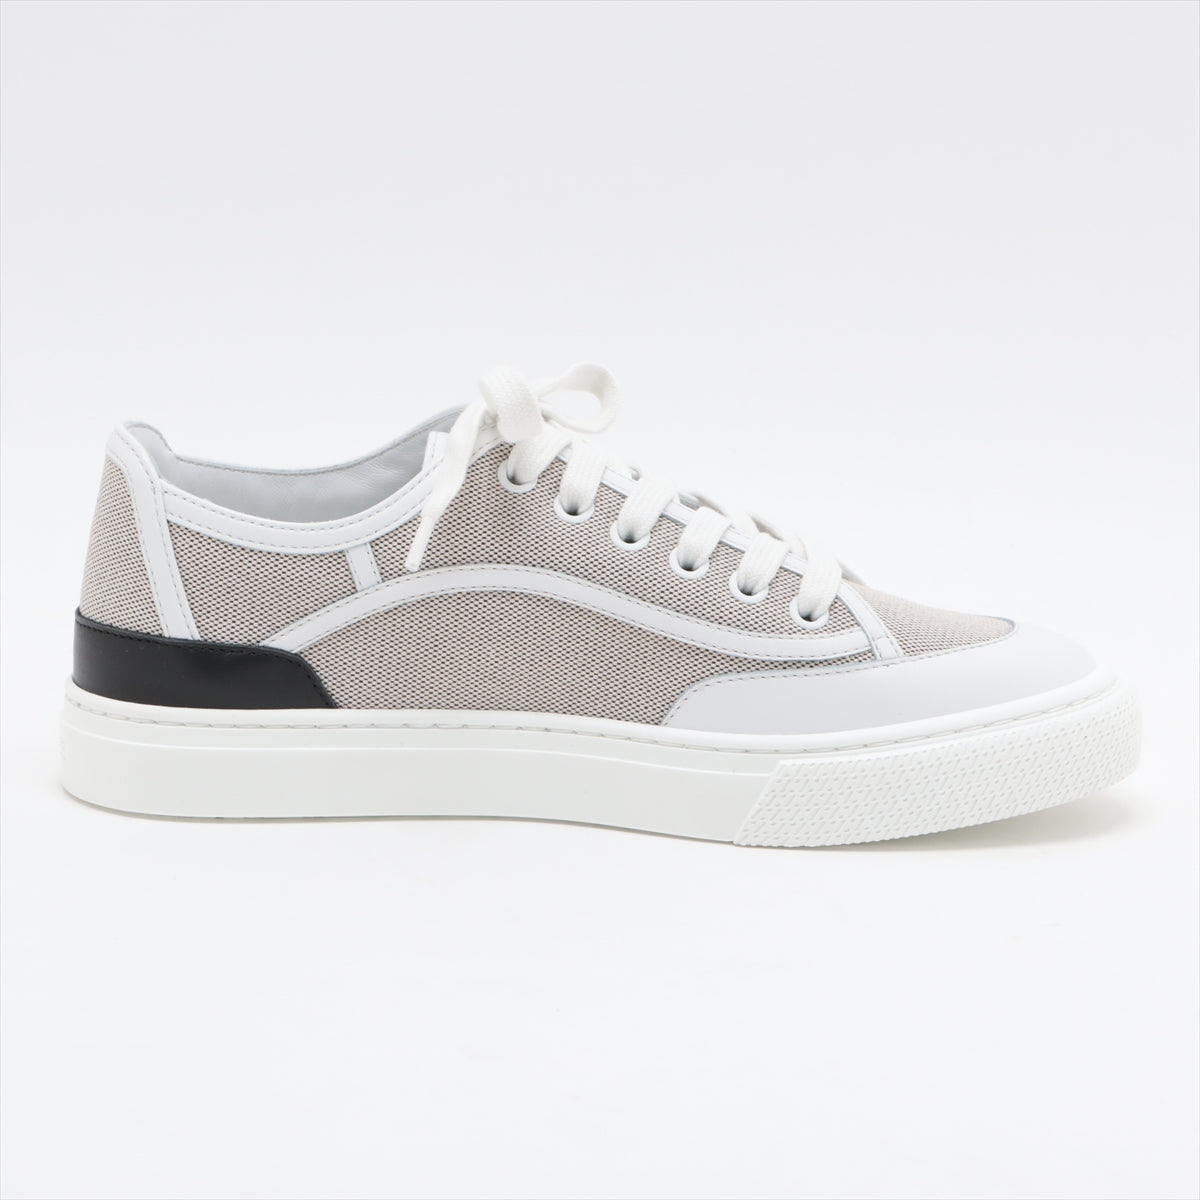 Hermès Canvas & leather Sneakers 36 Ladies' Beige x white get Toile H box sack Is there a replacement string